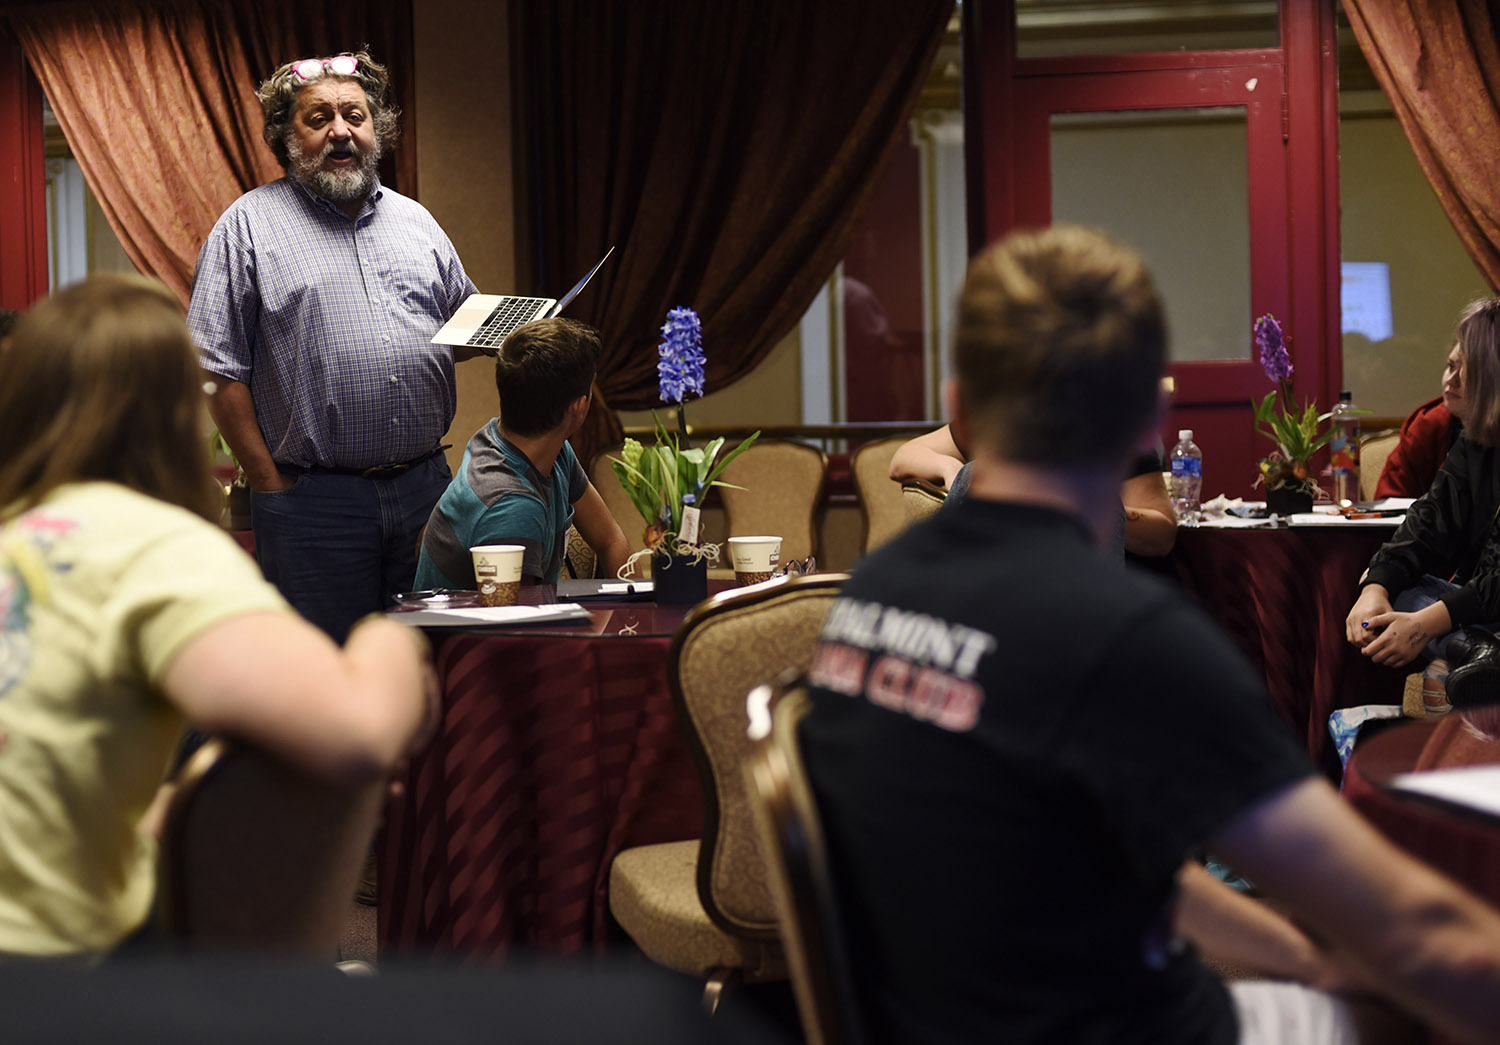 Proctors CEO Philip Morris talks to Broadway Tech students about the creative economy in the Guild Room at Proctors in Schenectady Thursday, September 28, 2017. Students spent four days with creative professionals from Proctors and The Color Purple during the show's teching period at the theatre.